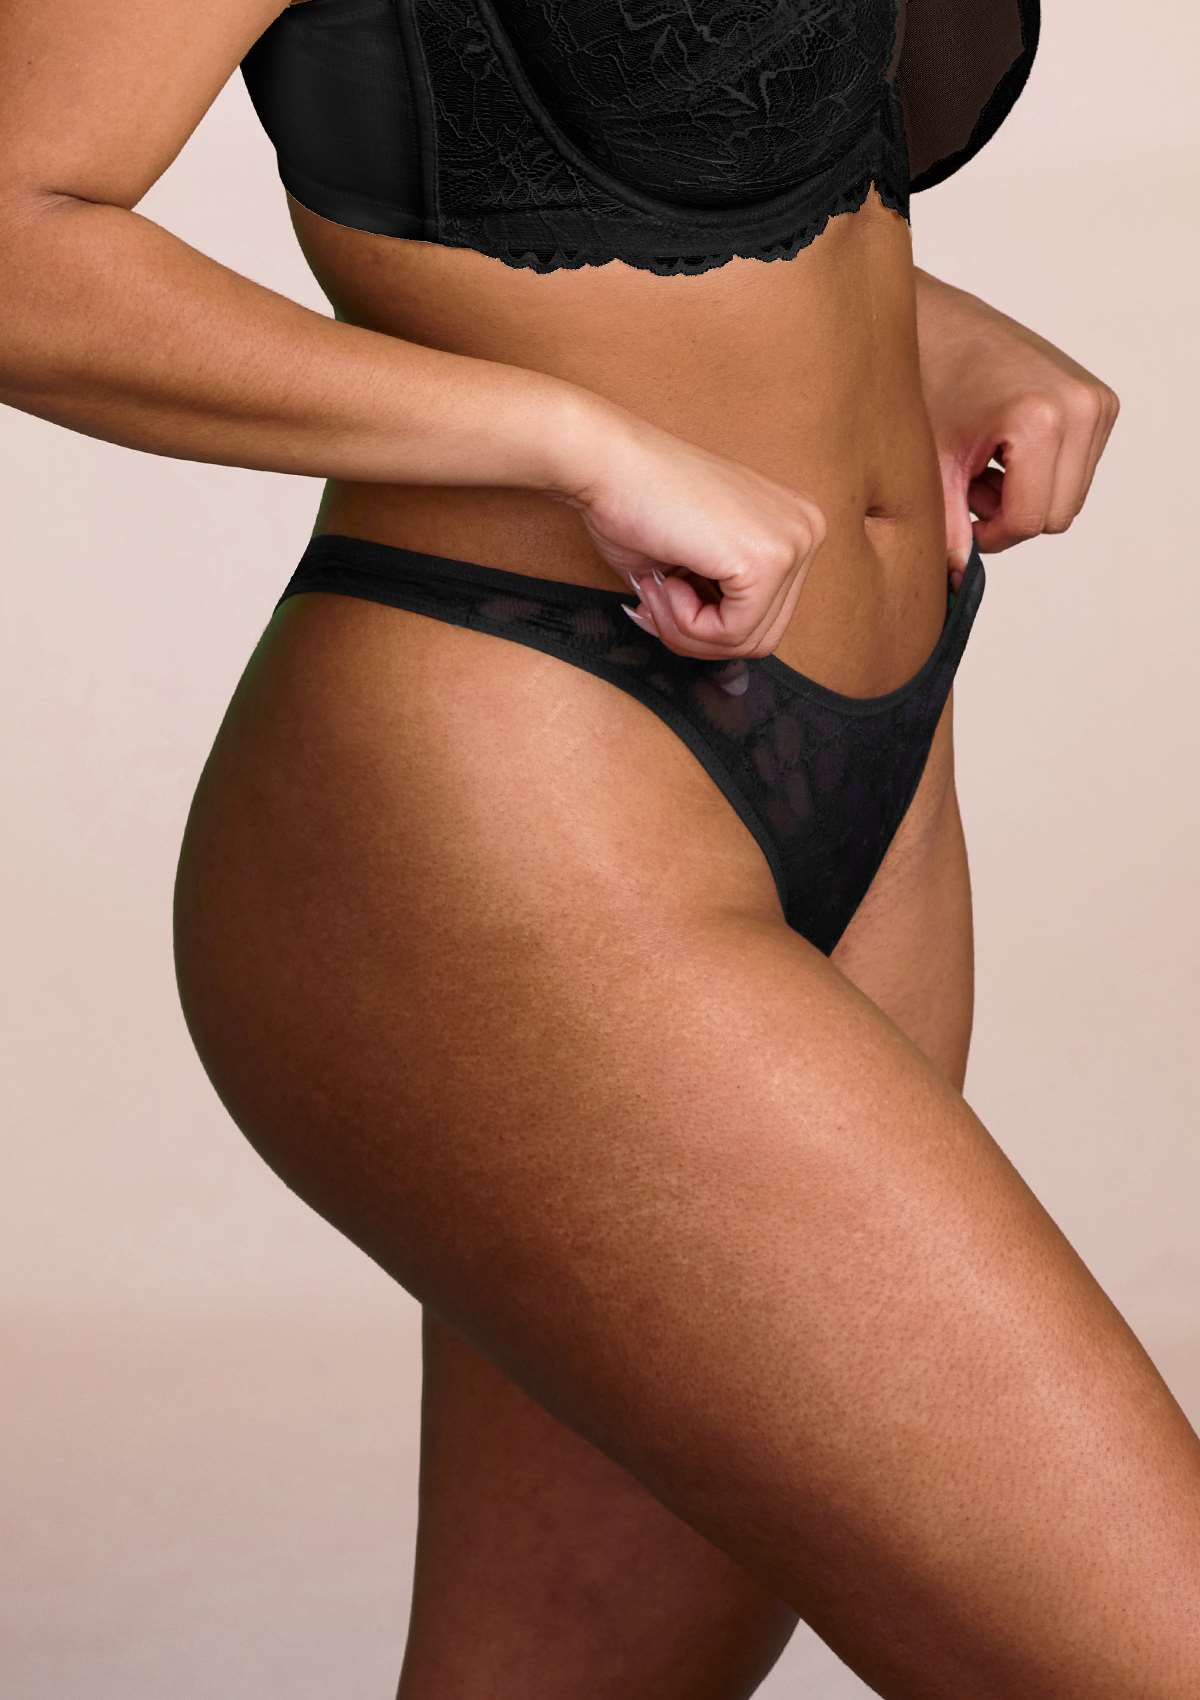 HSIA Soft Sexy Mesh Thong Underwear 3 Pack - L / Black+White+Light Coral